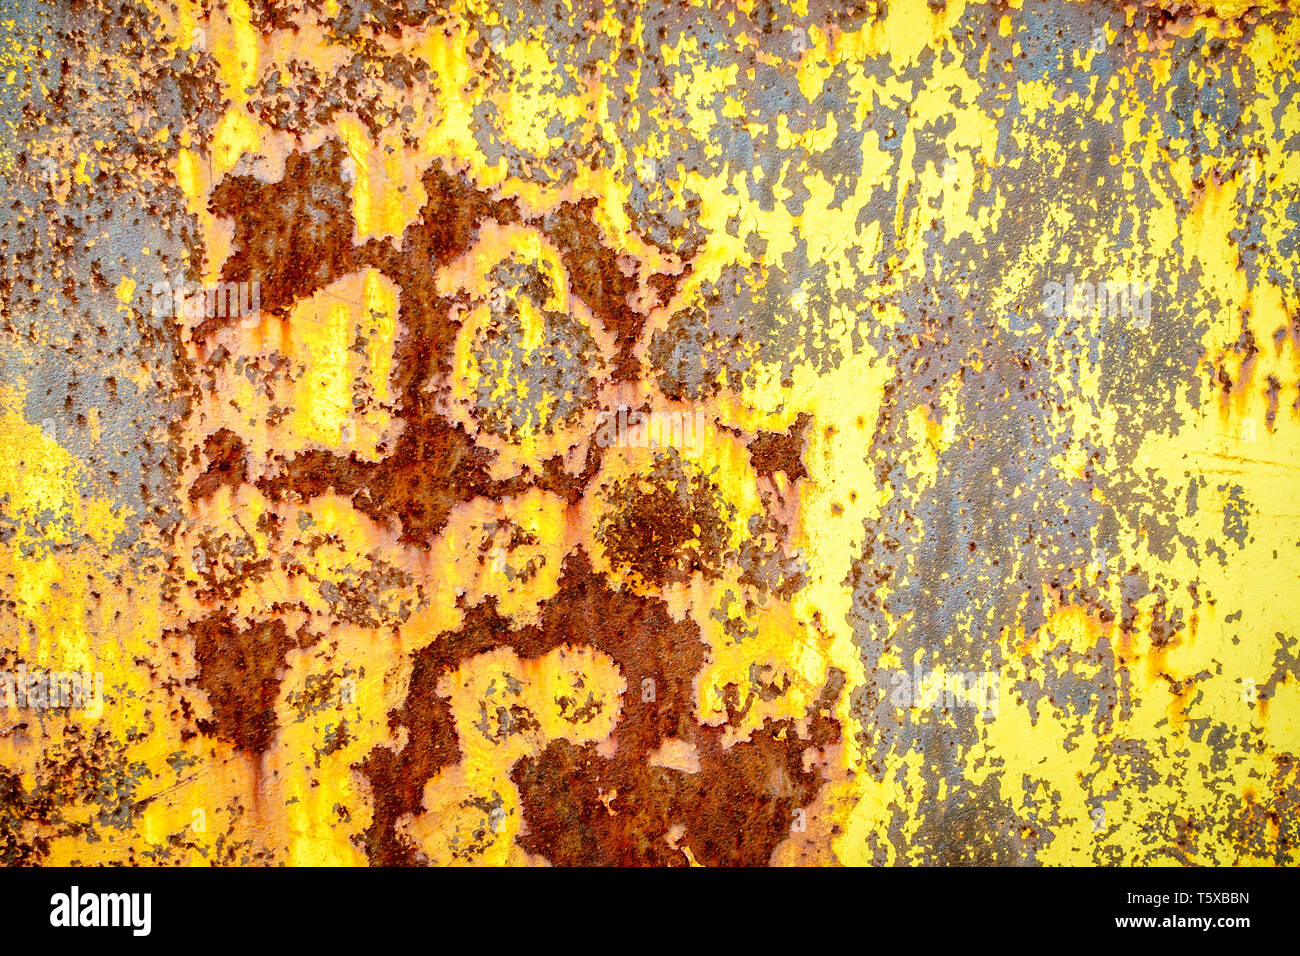 Close-up image of rusted metal surface with remnants of yellow paint Stock Photo